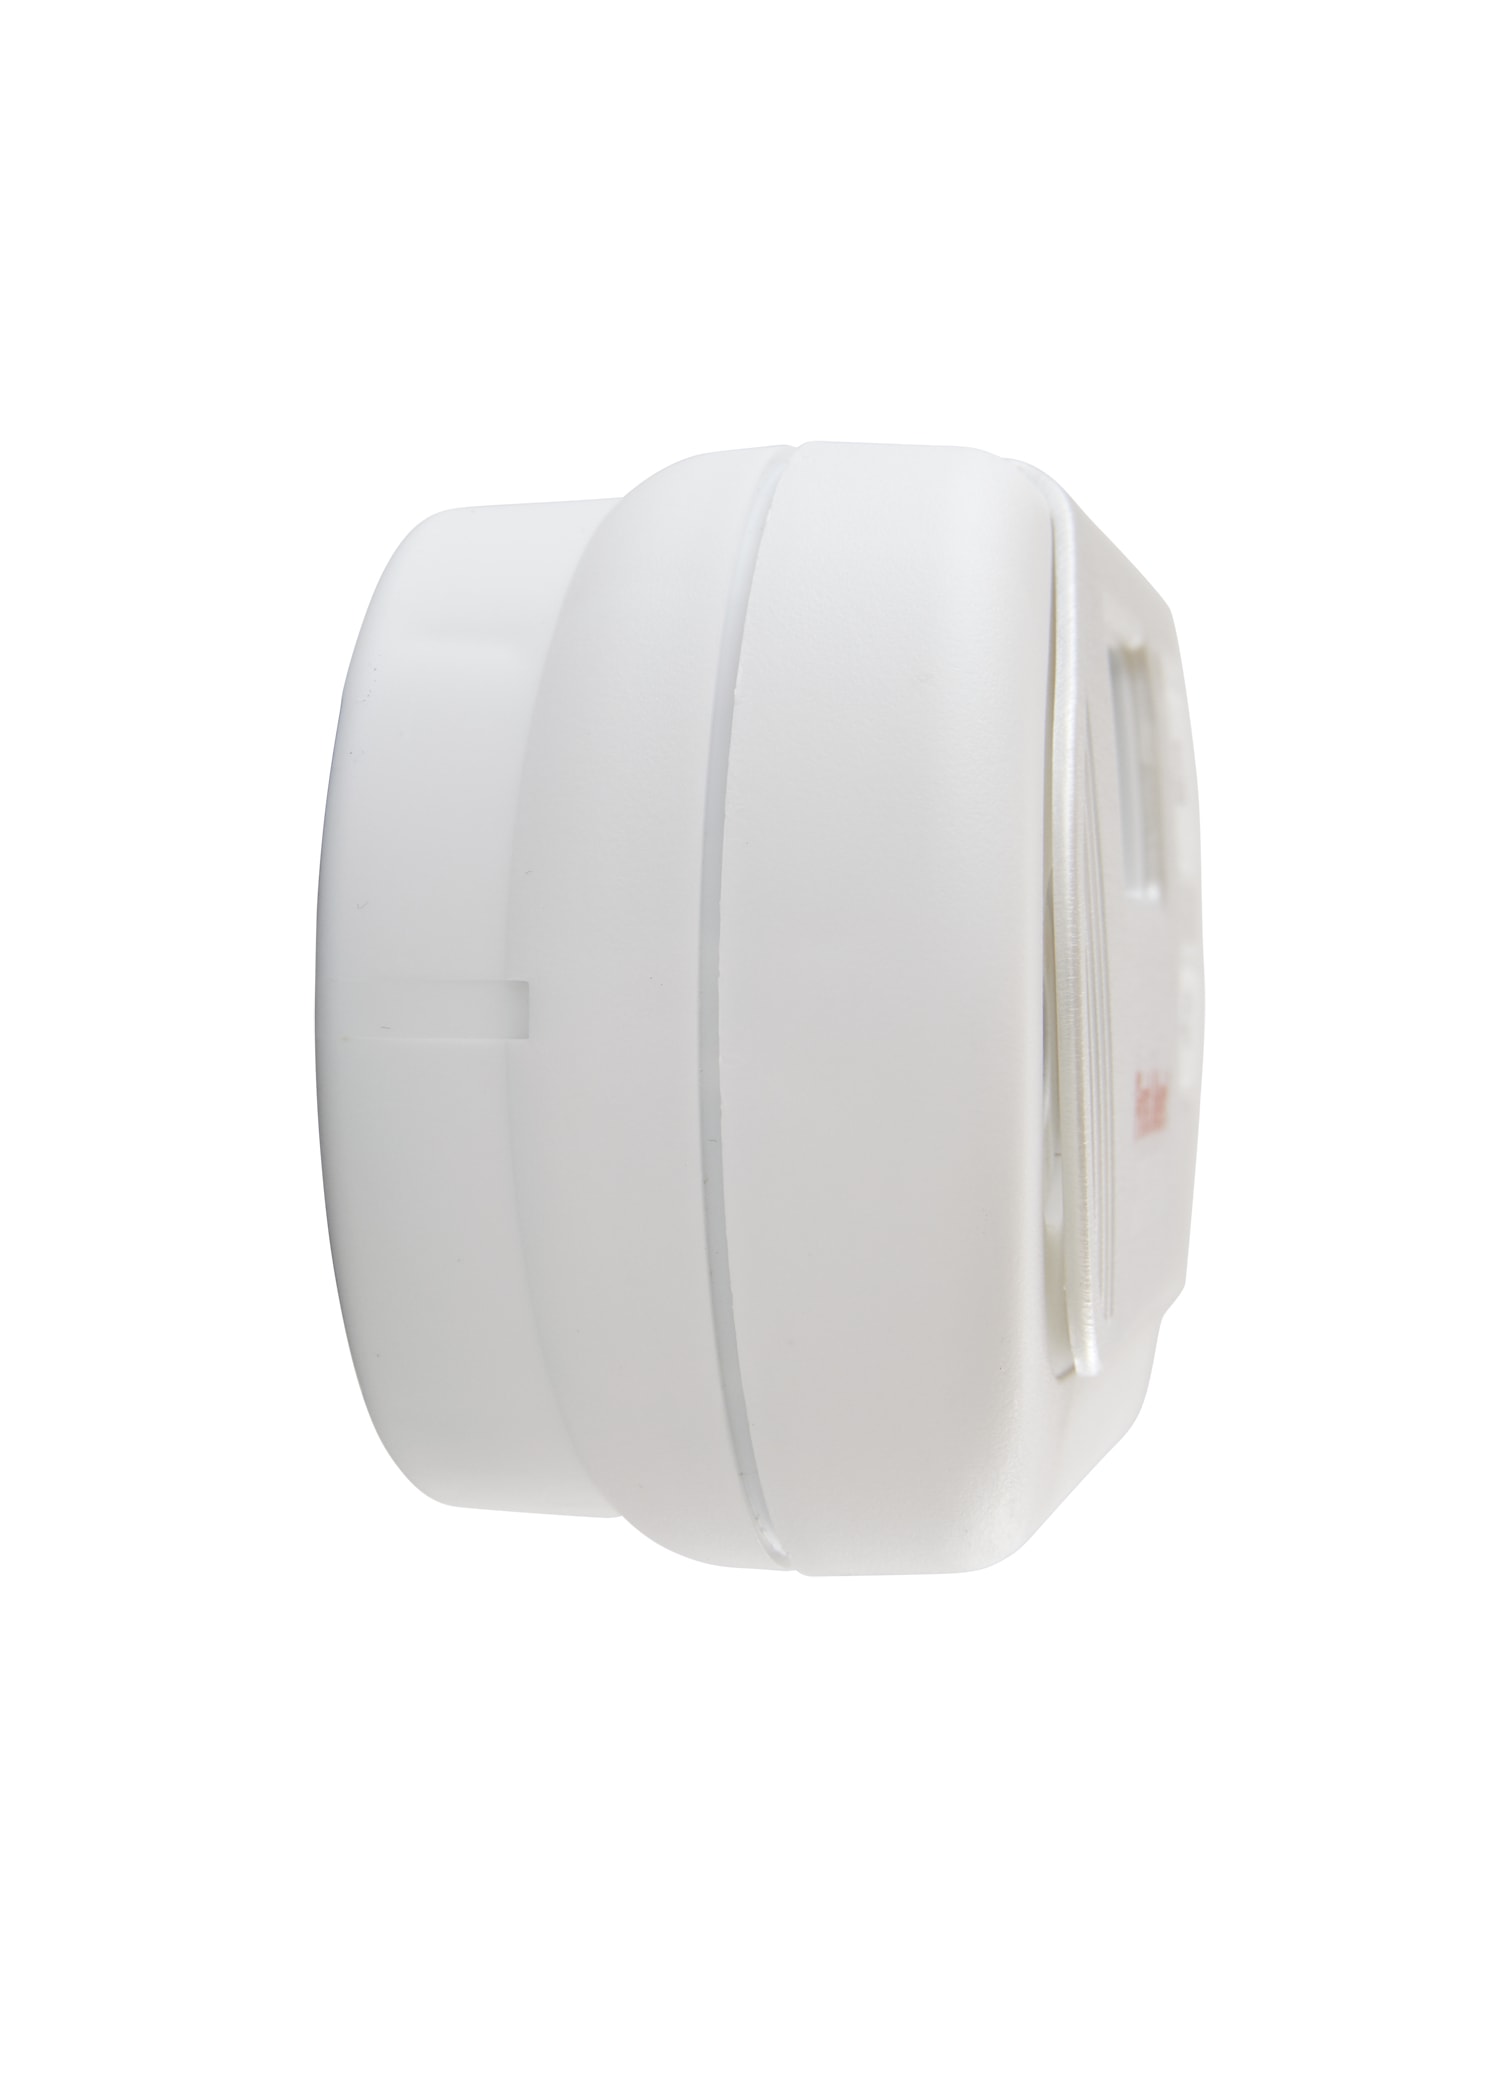 First Alert GCO1CN Combination Explosive Gas and Carbon Monoxide Alarm with Backlit Digital Display - image 3 of 5